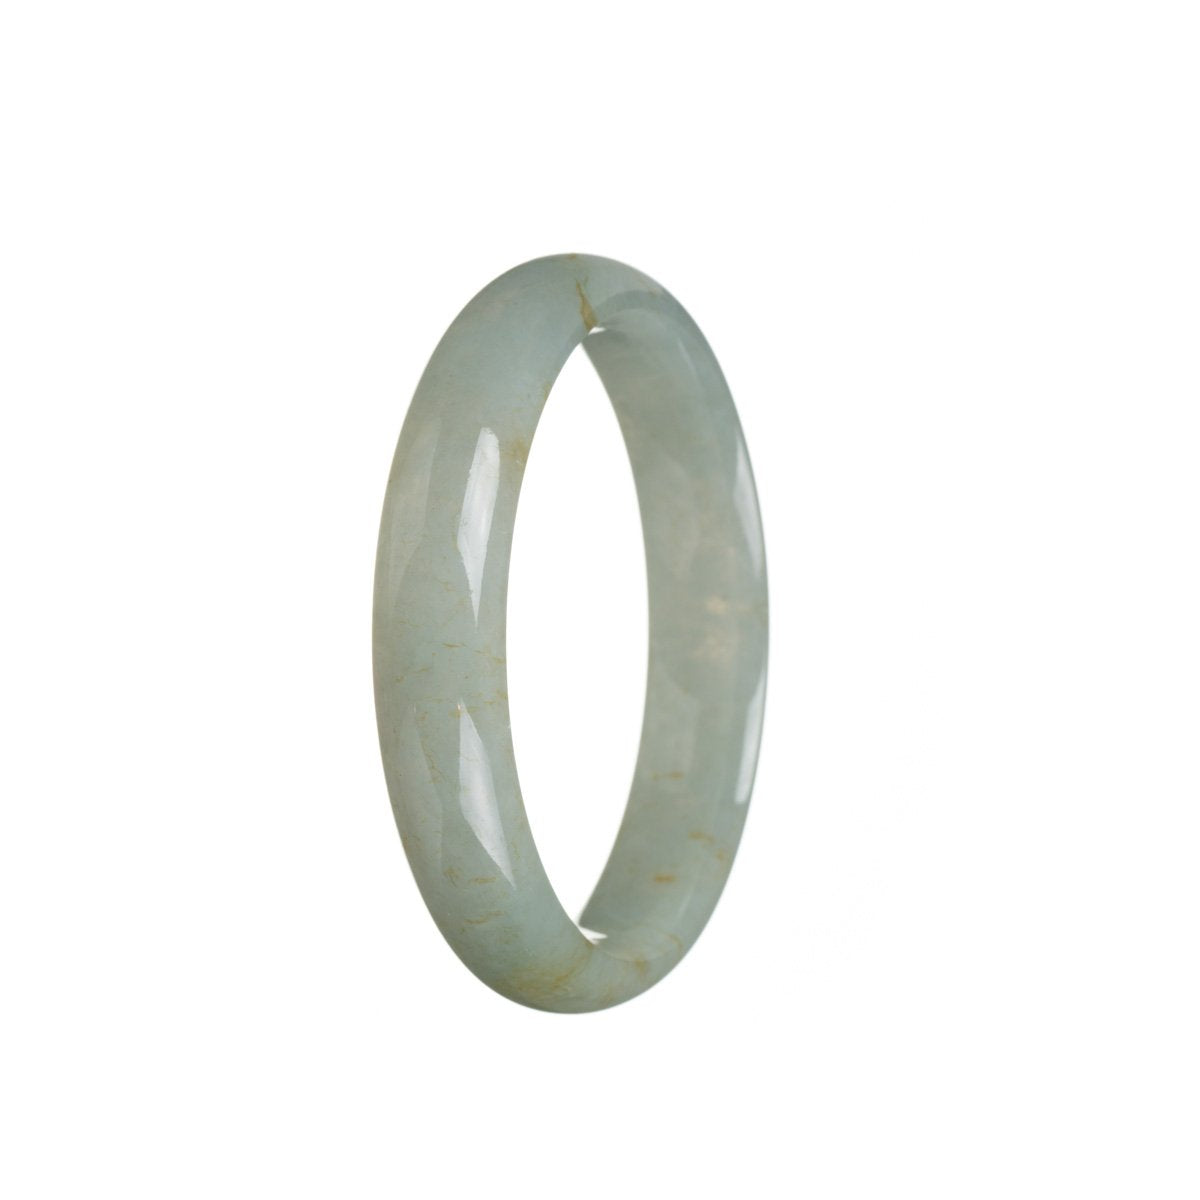 A close-up photo of a real grade A greyish green Burma Jade bangle. The bangle is shaped like a half moon and measures 55mm in size. It is a stunning piece of jewelry from MAYS GEMS.